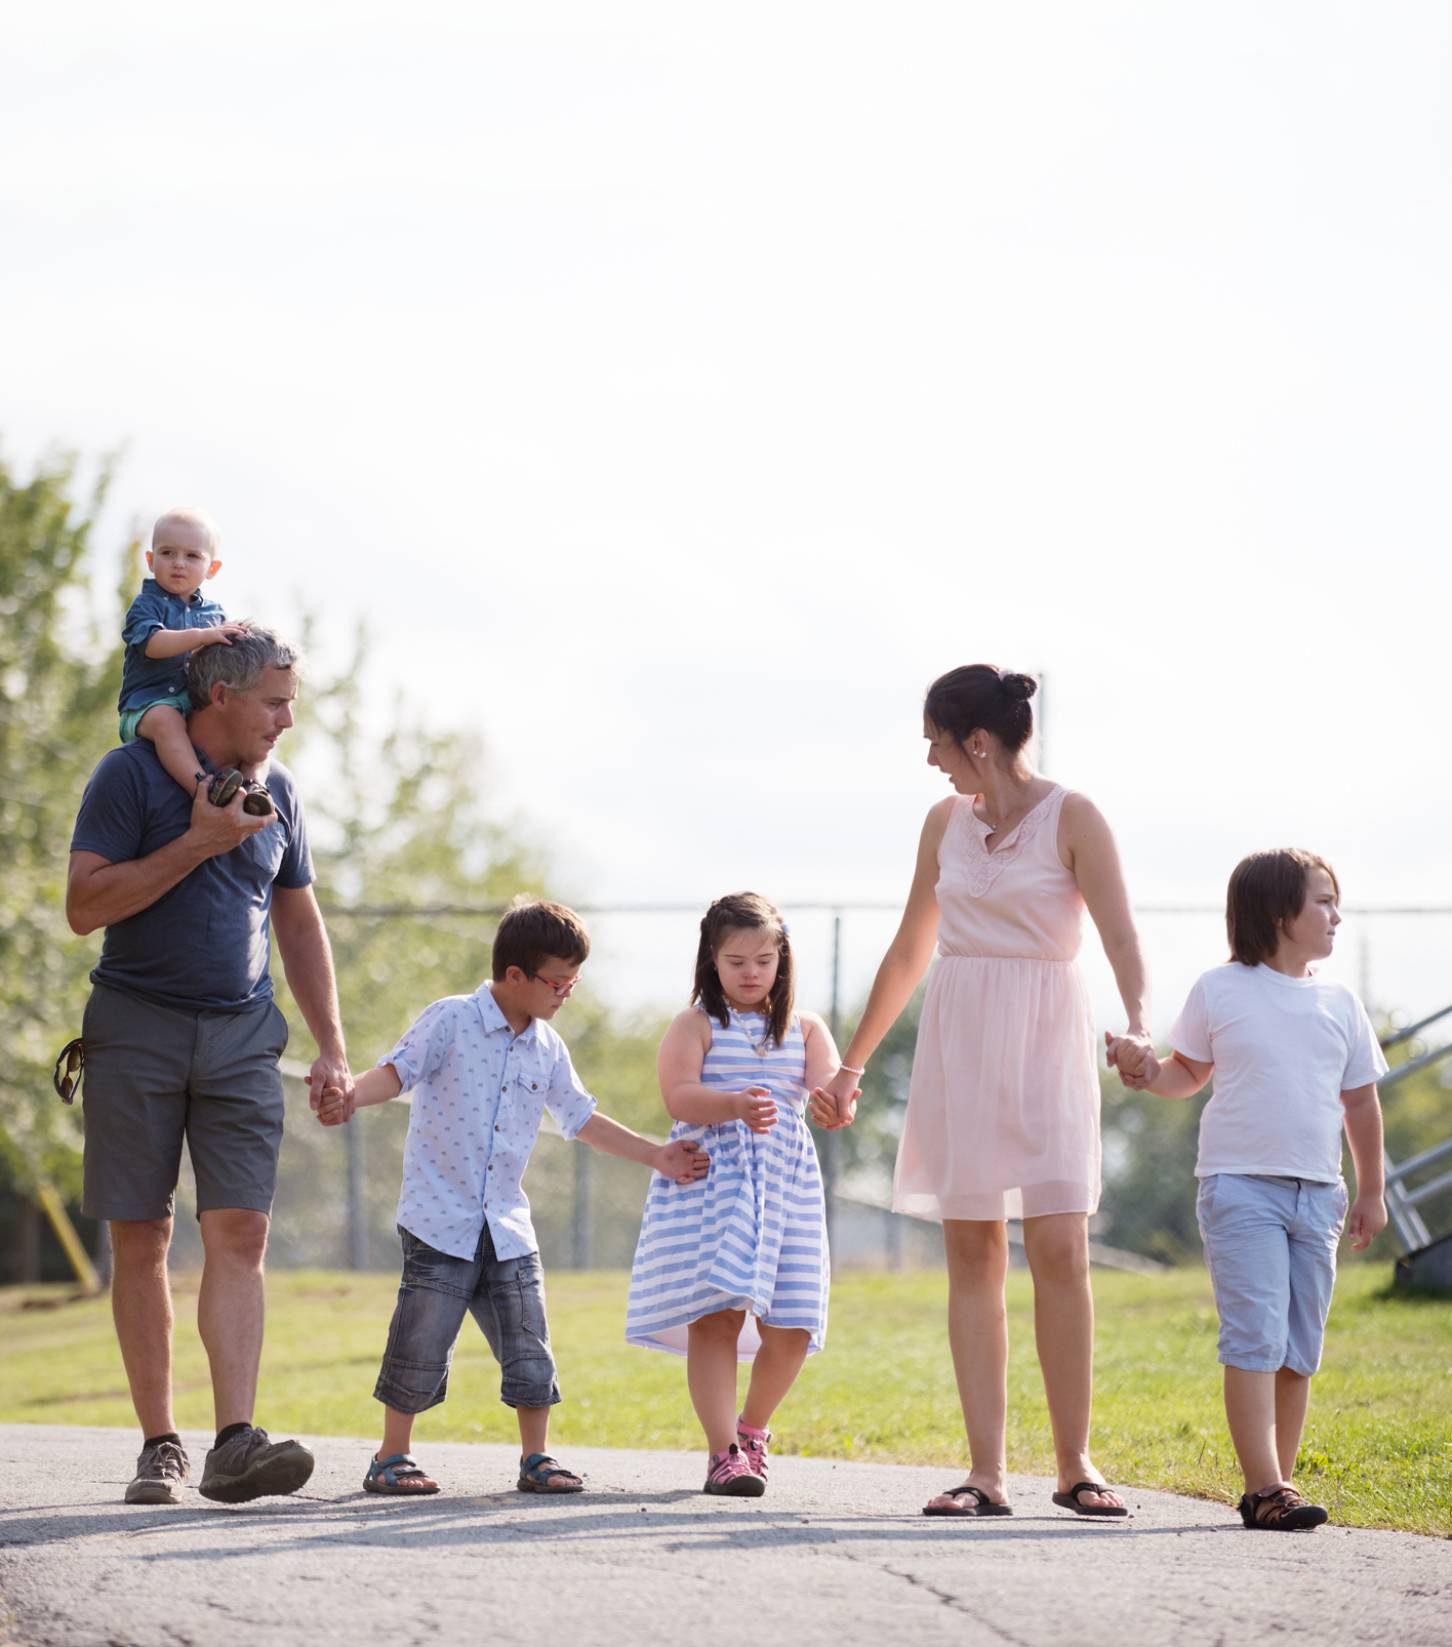 Couple with 4 small children taking a walk & all holding hands